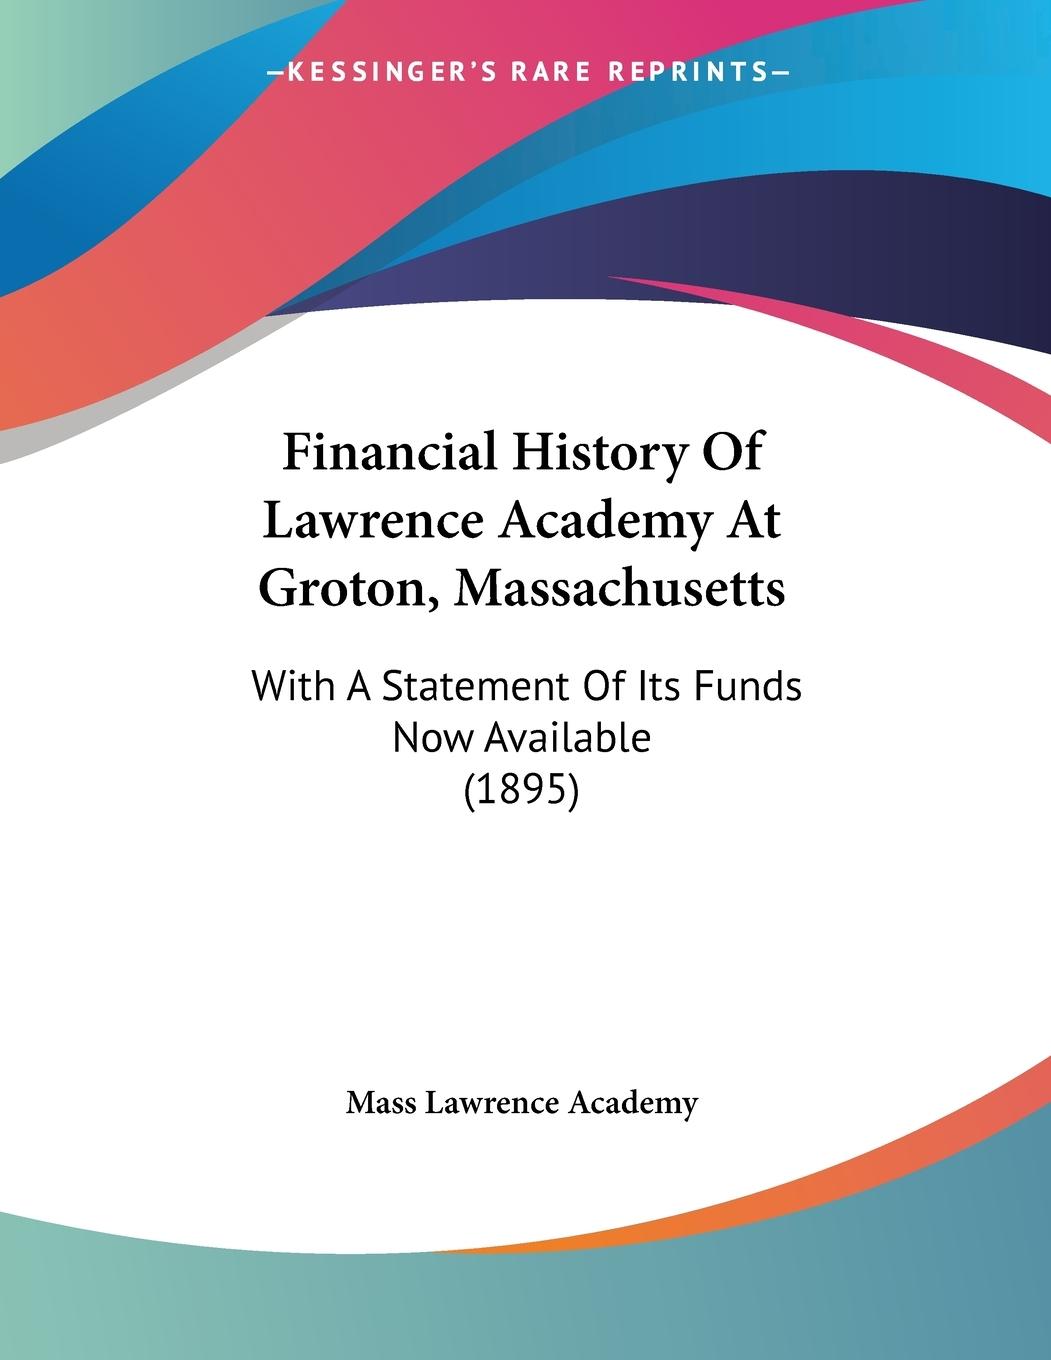 Financial History Of Lawrence Academy At Groton, Massachusetts - Mass Lawrence Academy